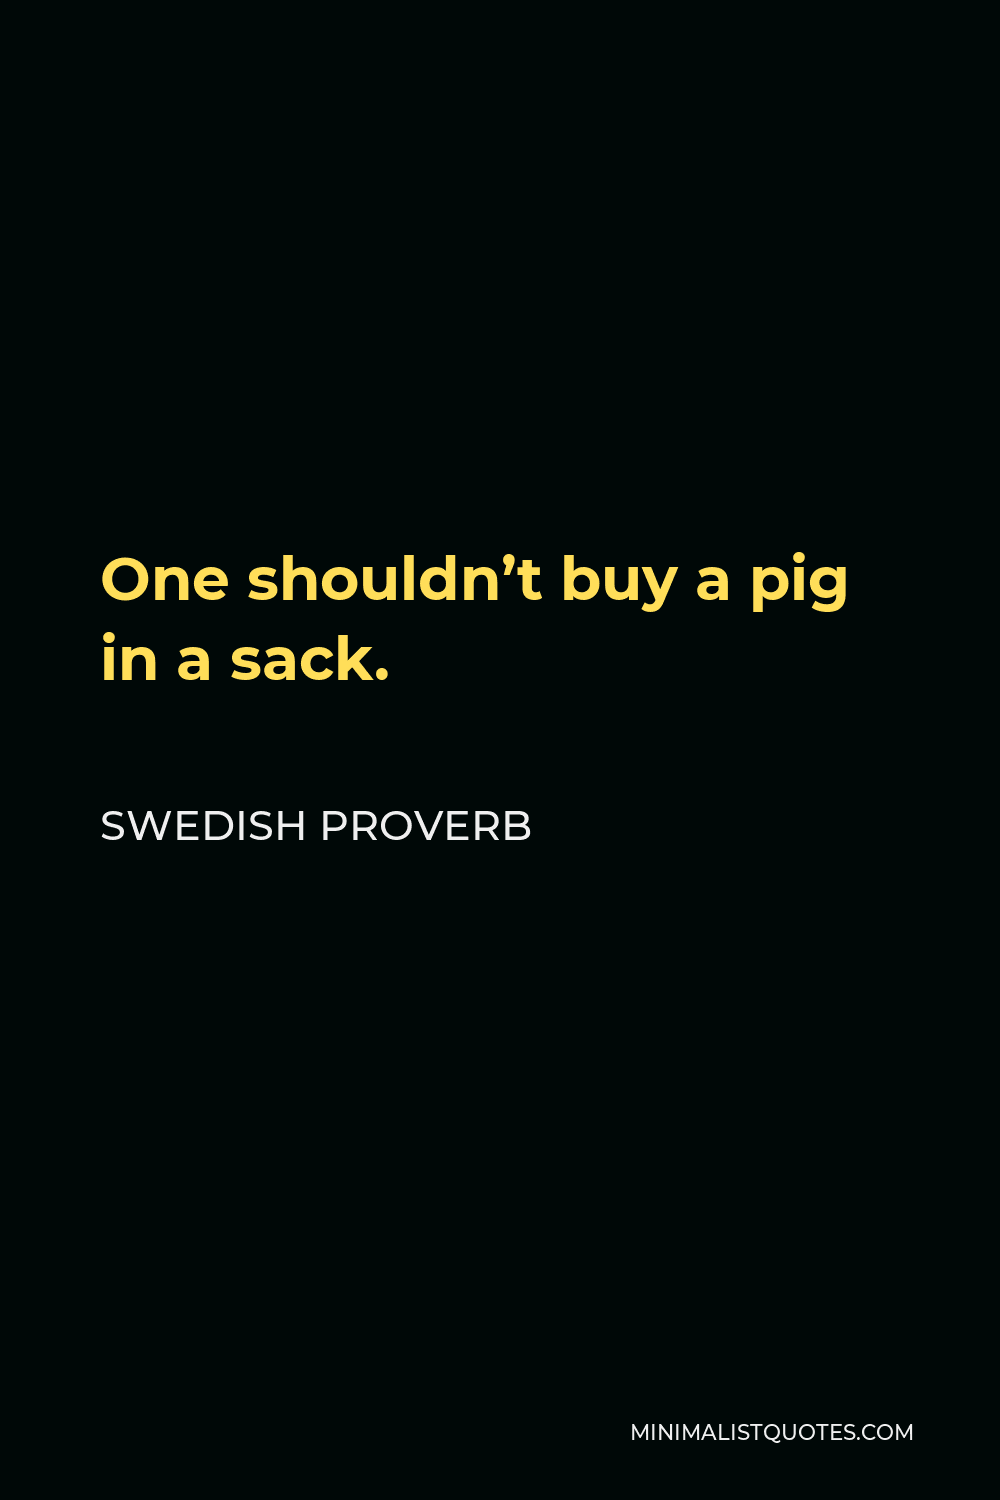 Swedish Proverb Quote - One shouldn’t buy a pig in a sack.